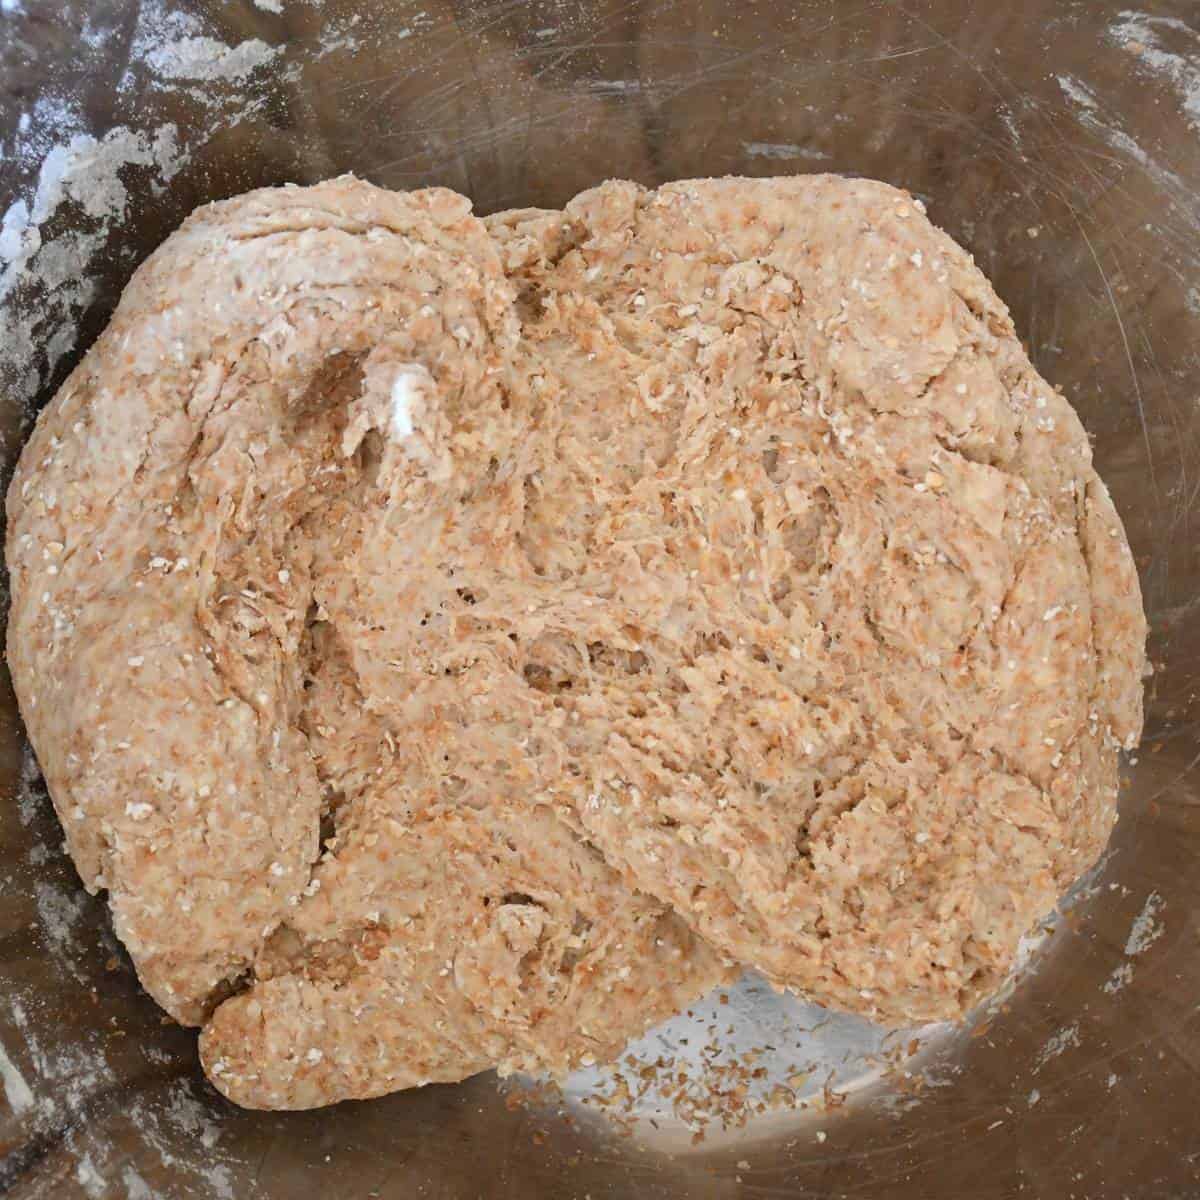 Low sodium whole wheat pizza dough mixed in a stainless bowl.